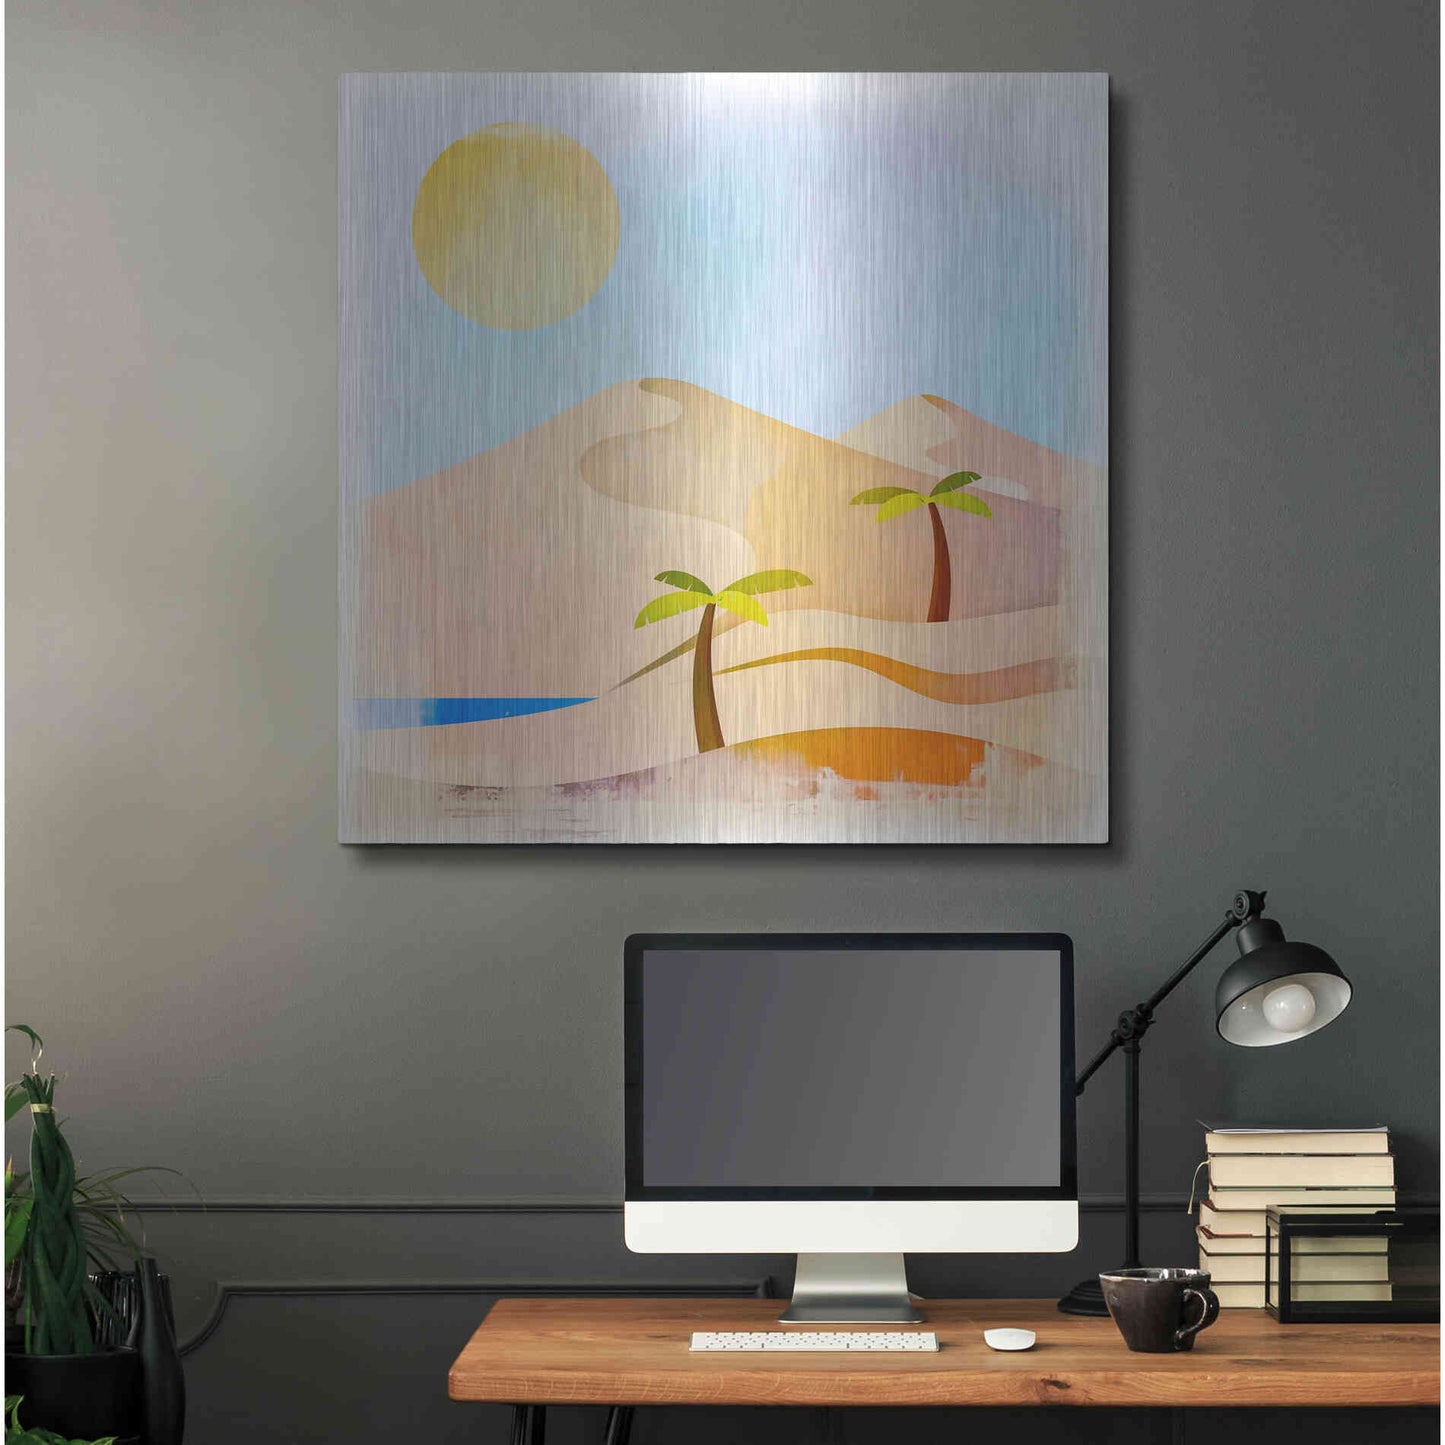 Luxe Metal Art 'Oasis Sunset' by Andrea Haase, Metal Wall At,36x36